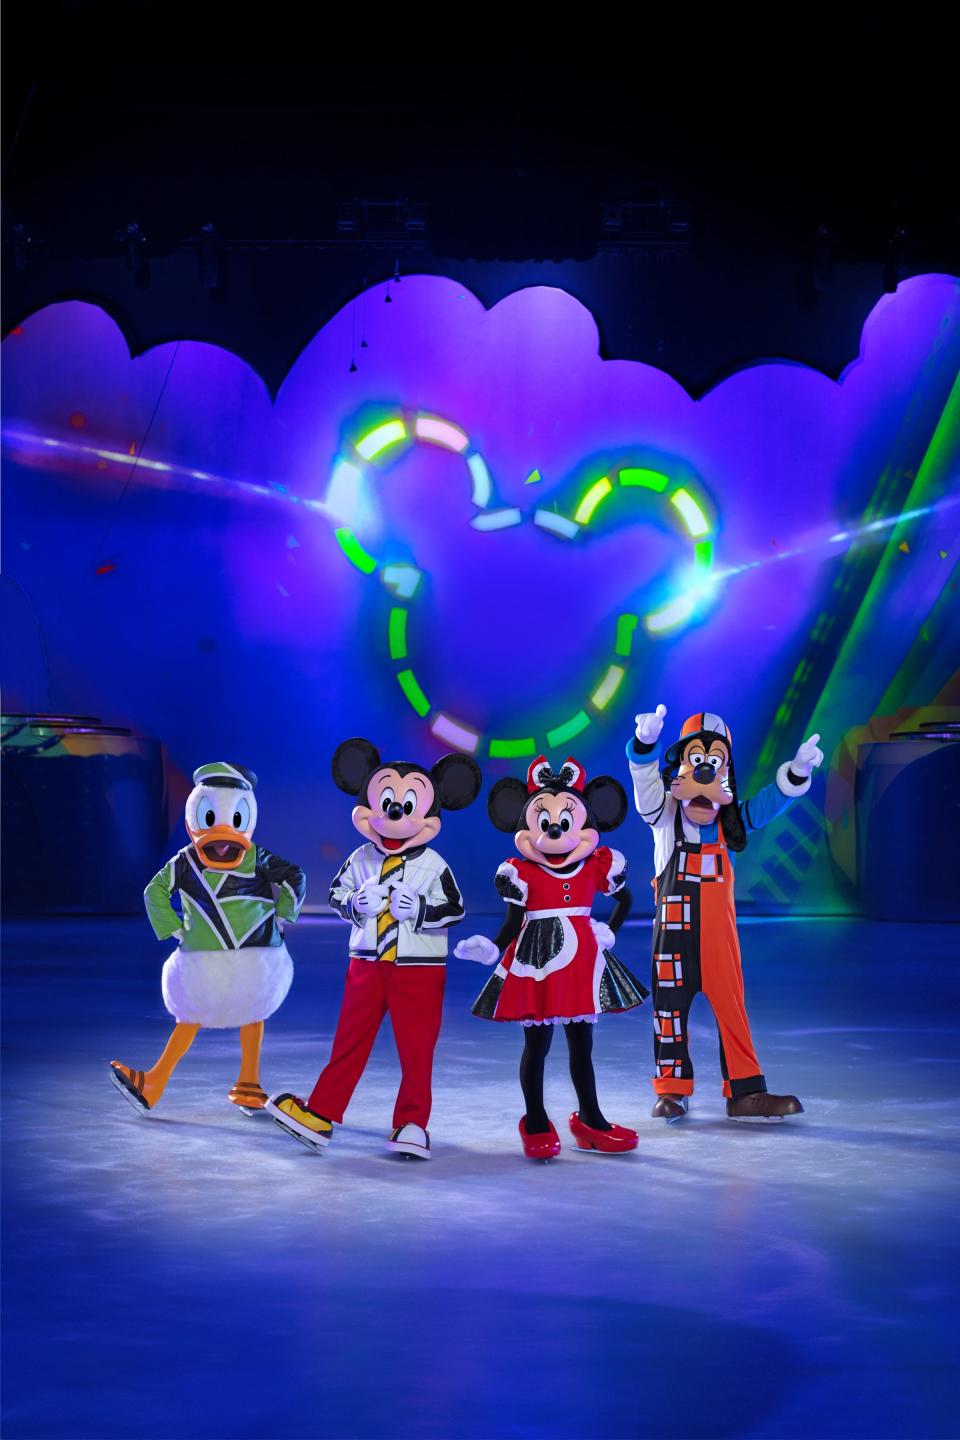 The two-hour show boasts many Disney characters who will skate their way into your heart.